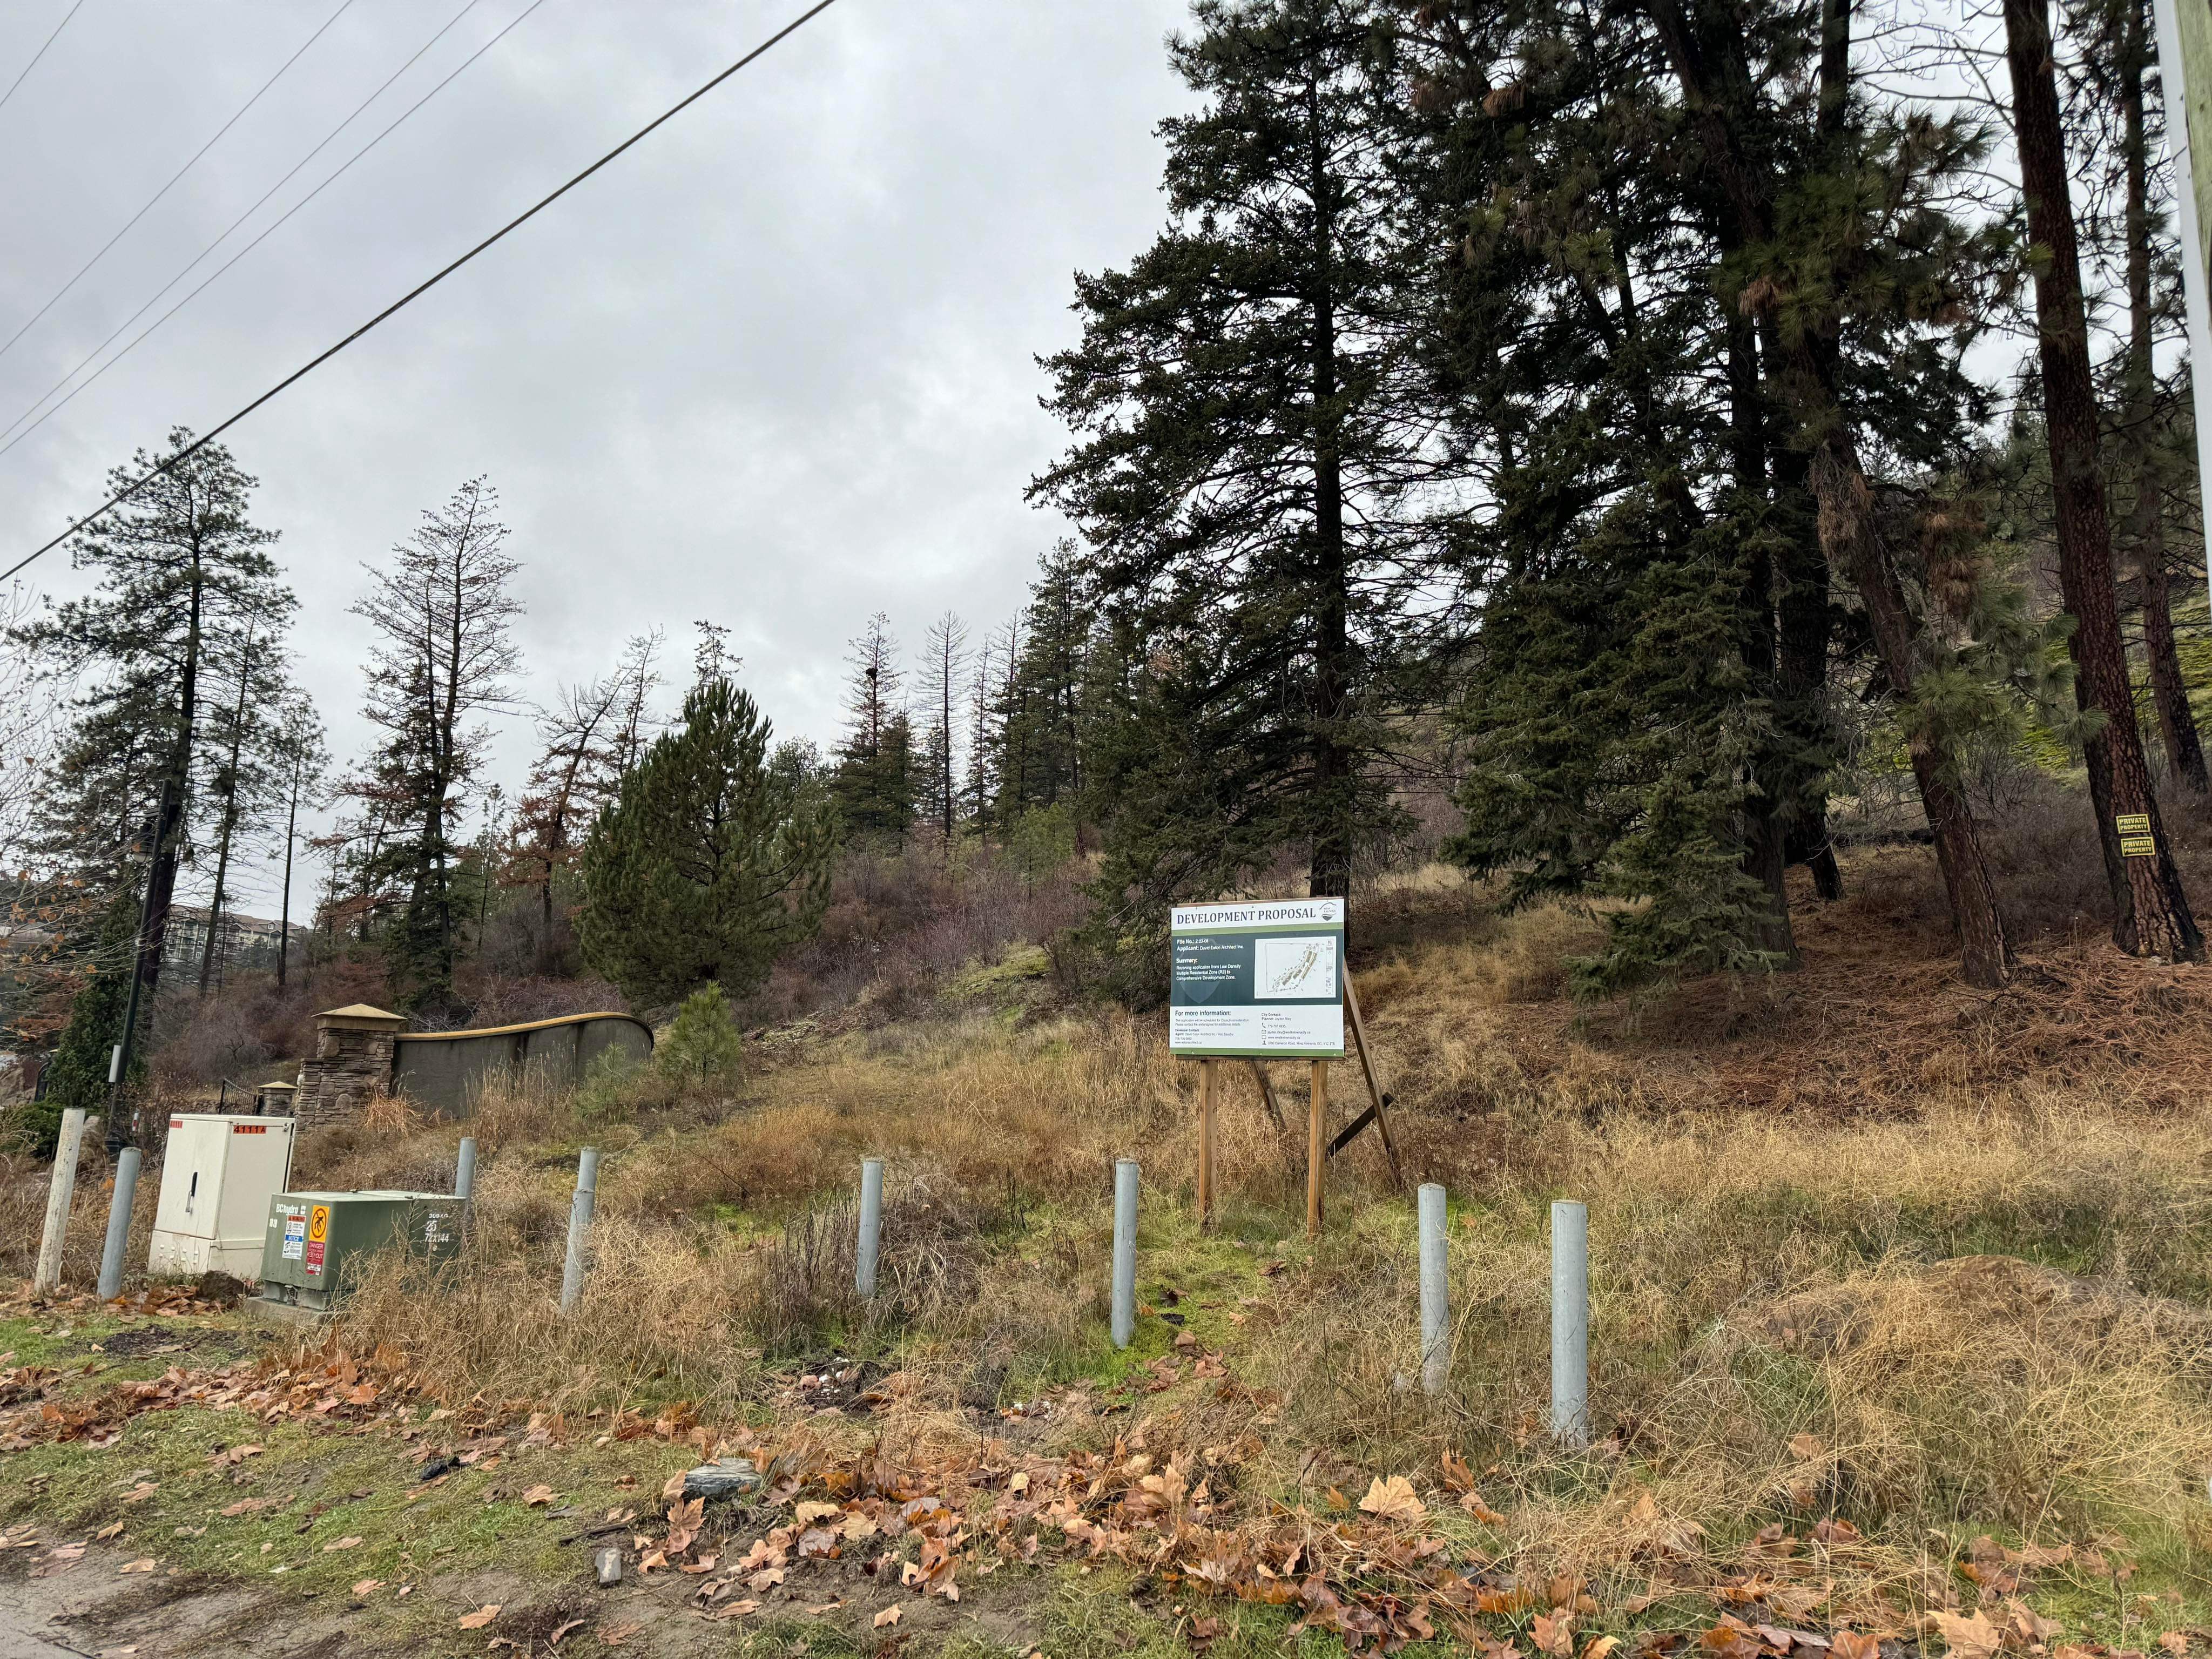 West Kelowna residents voice concerns over proposed housing development